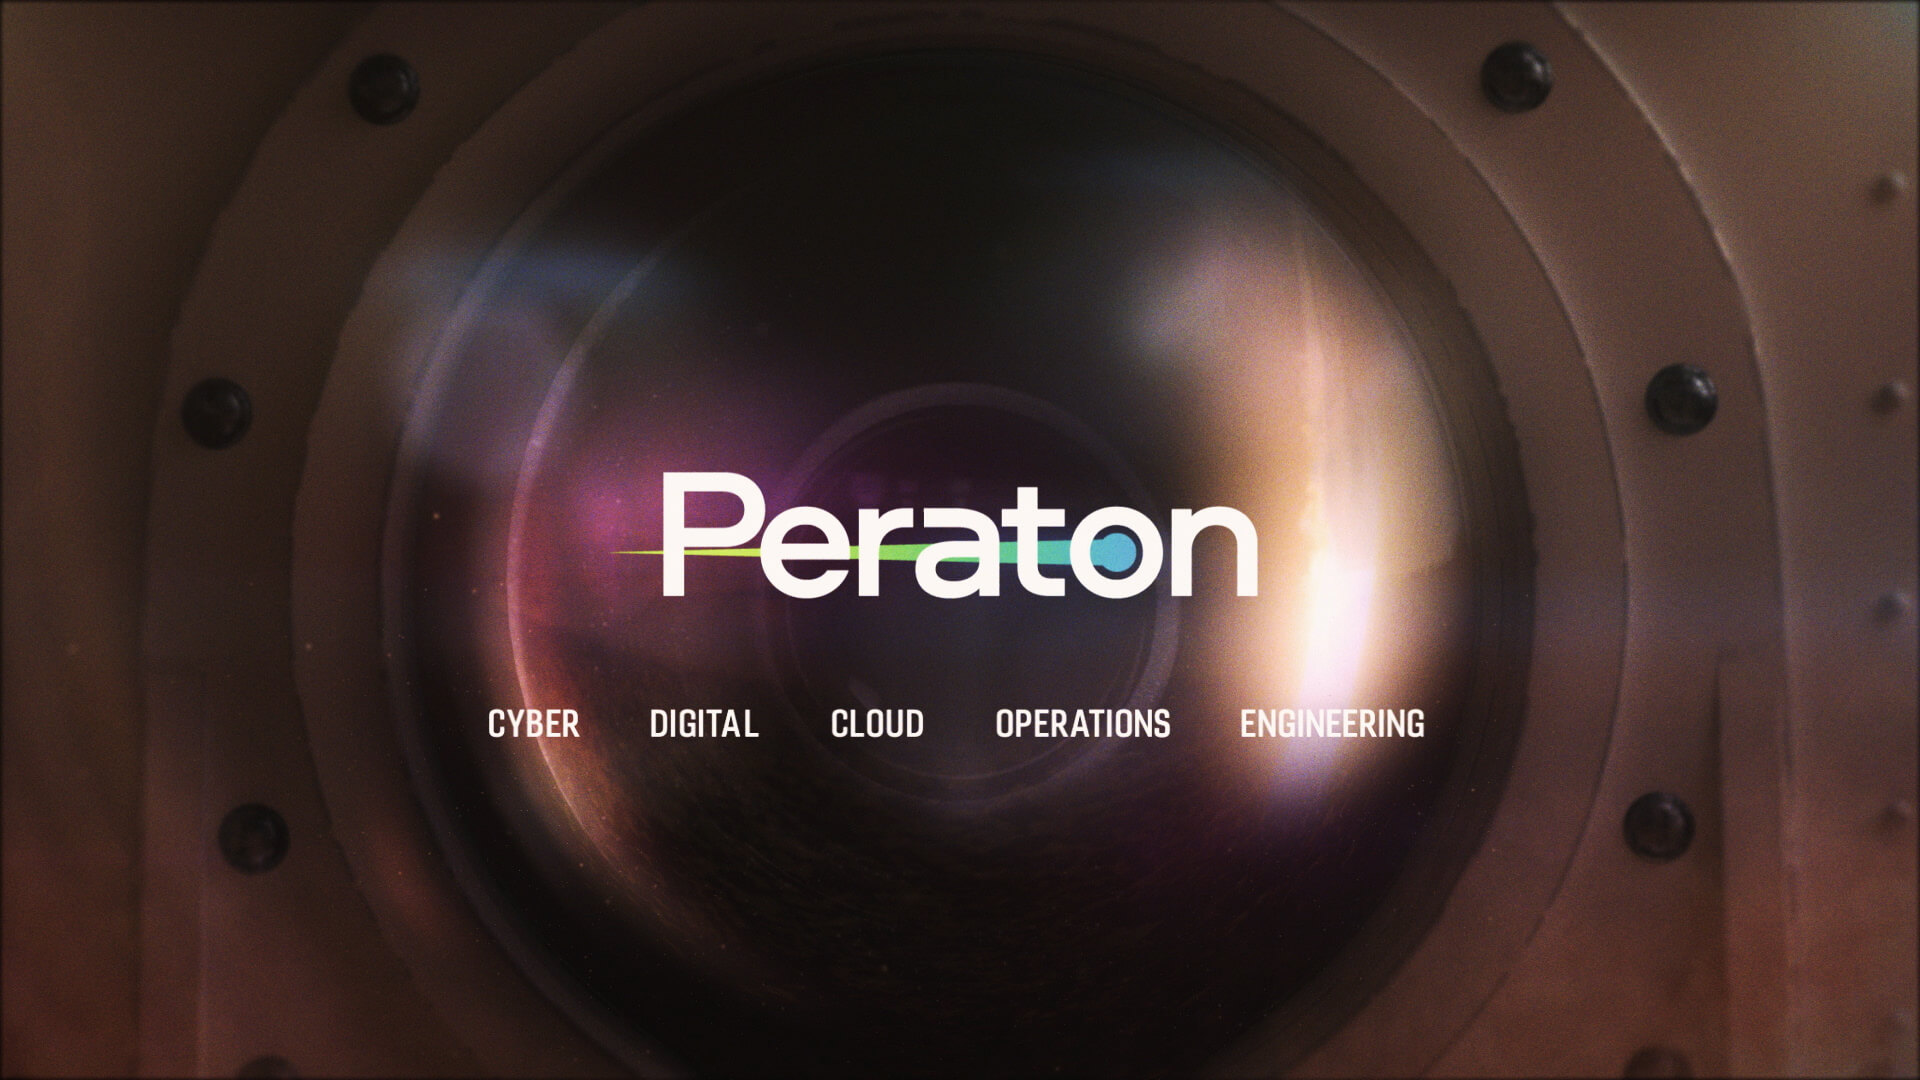 Still from Peraton TVC depicting the Peraton logo overlaid onto the window of a space craft created using VFX by VANDAL